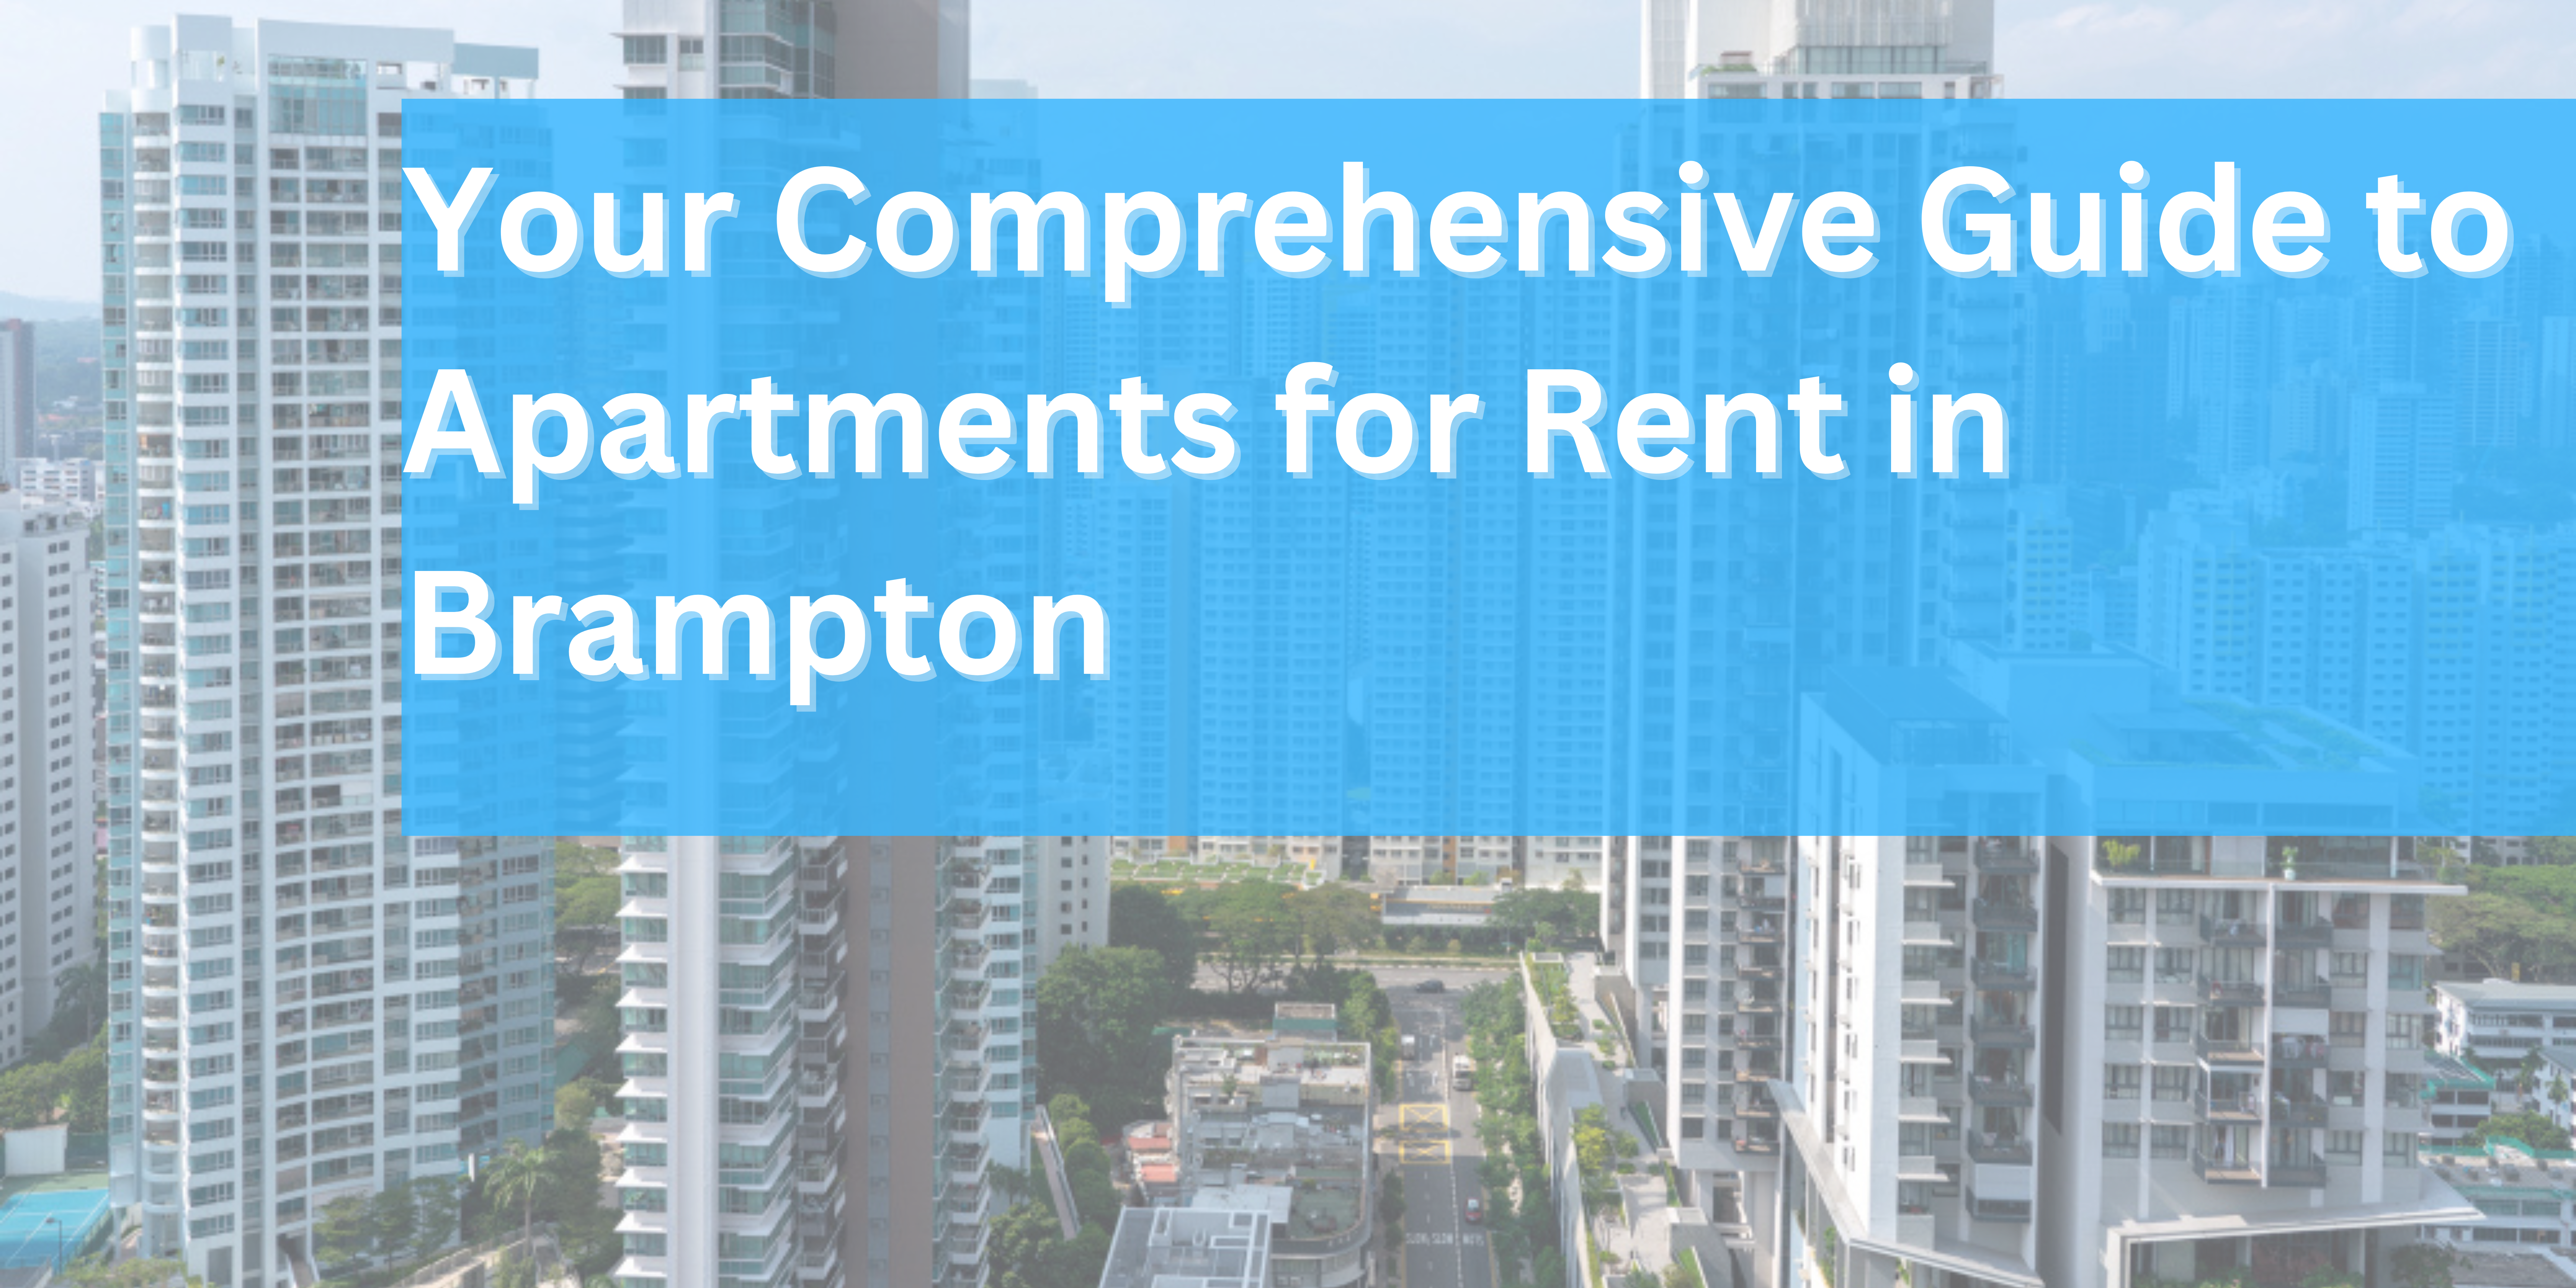 Your Comprehensive Guide to Apartments for Rent in Brampton